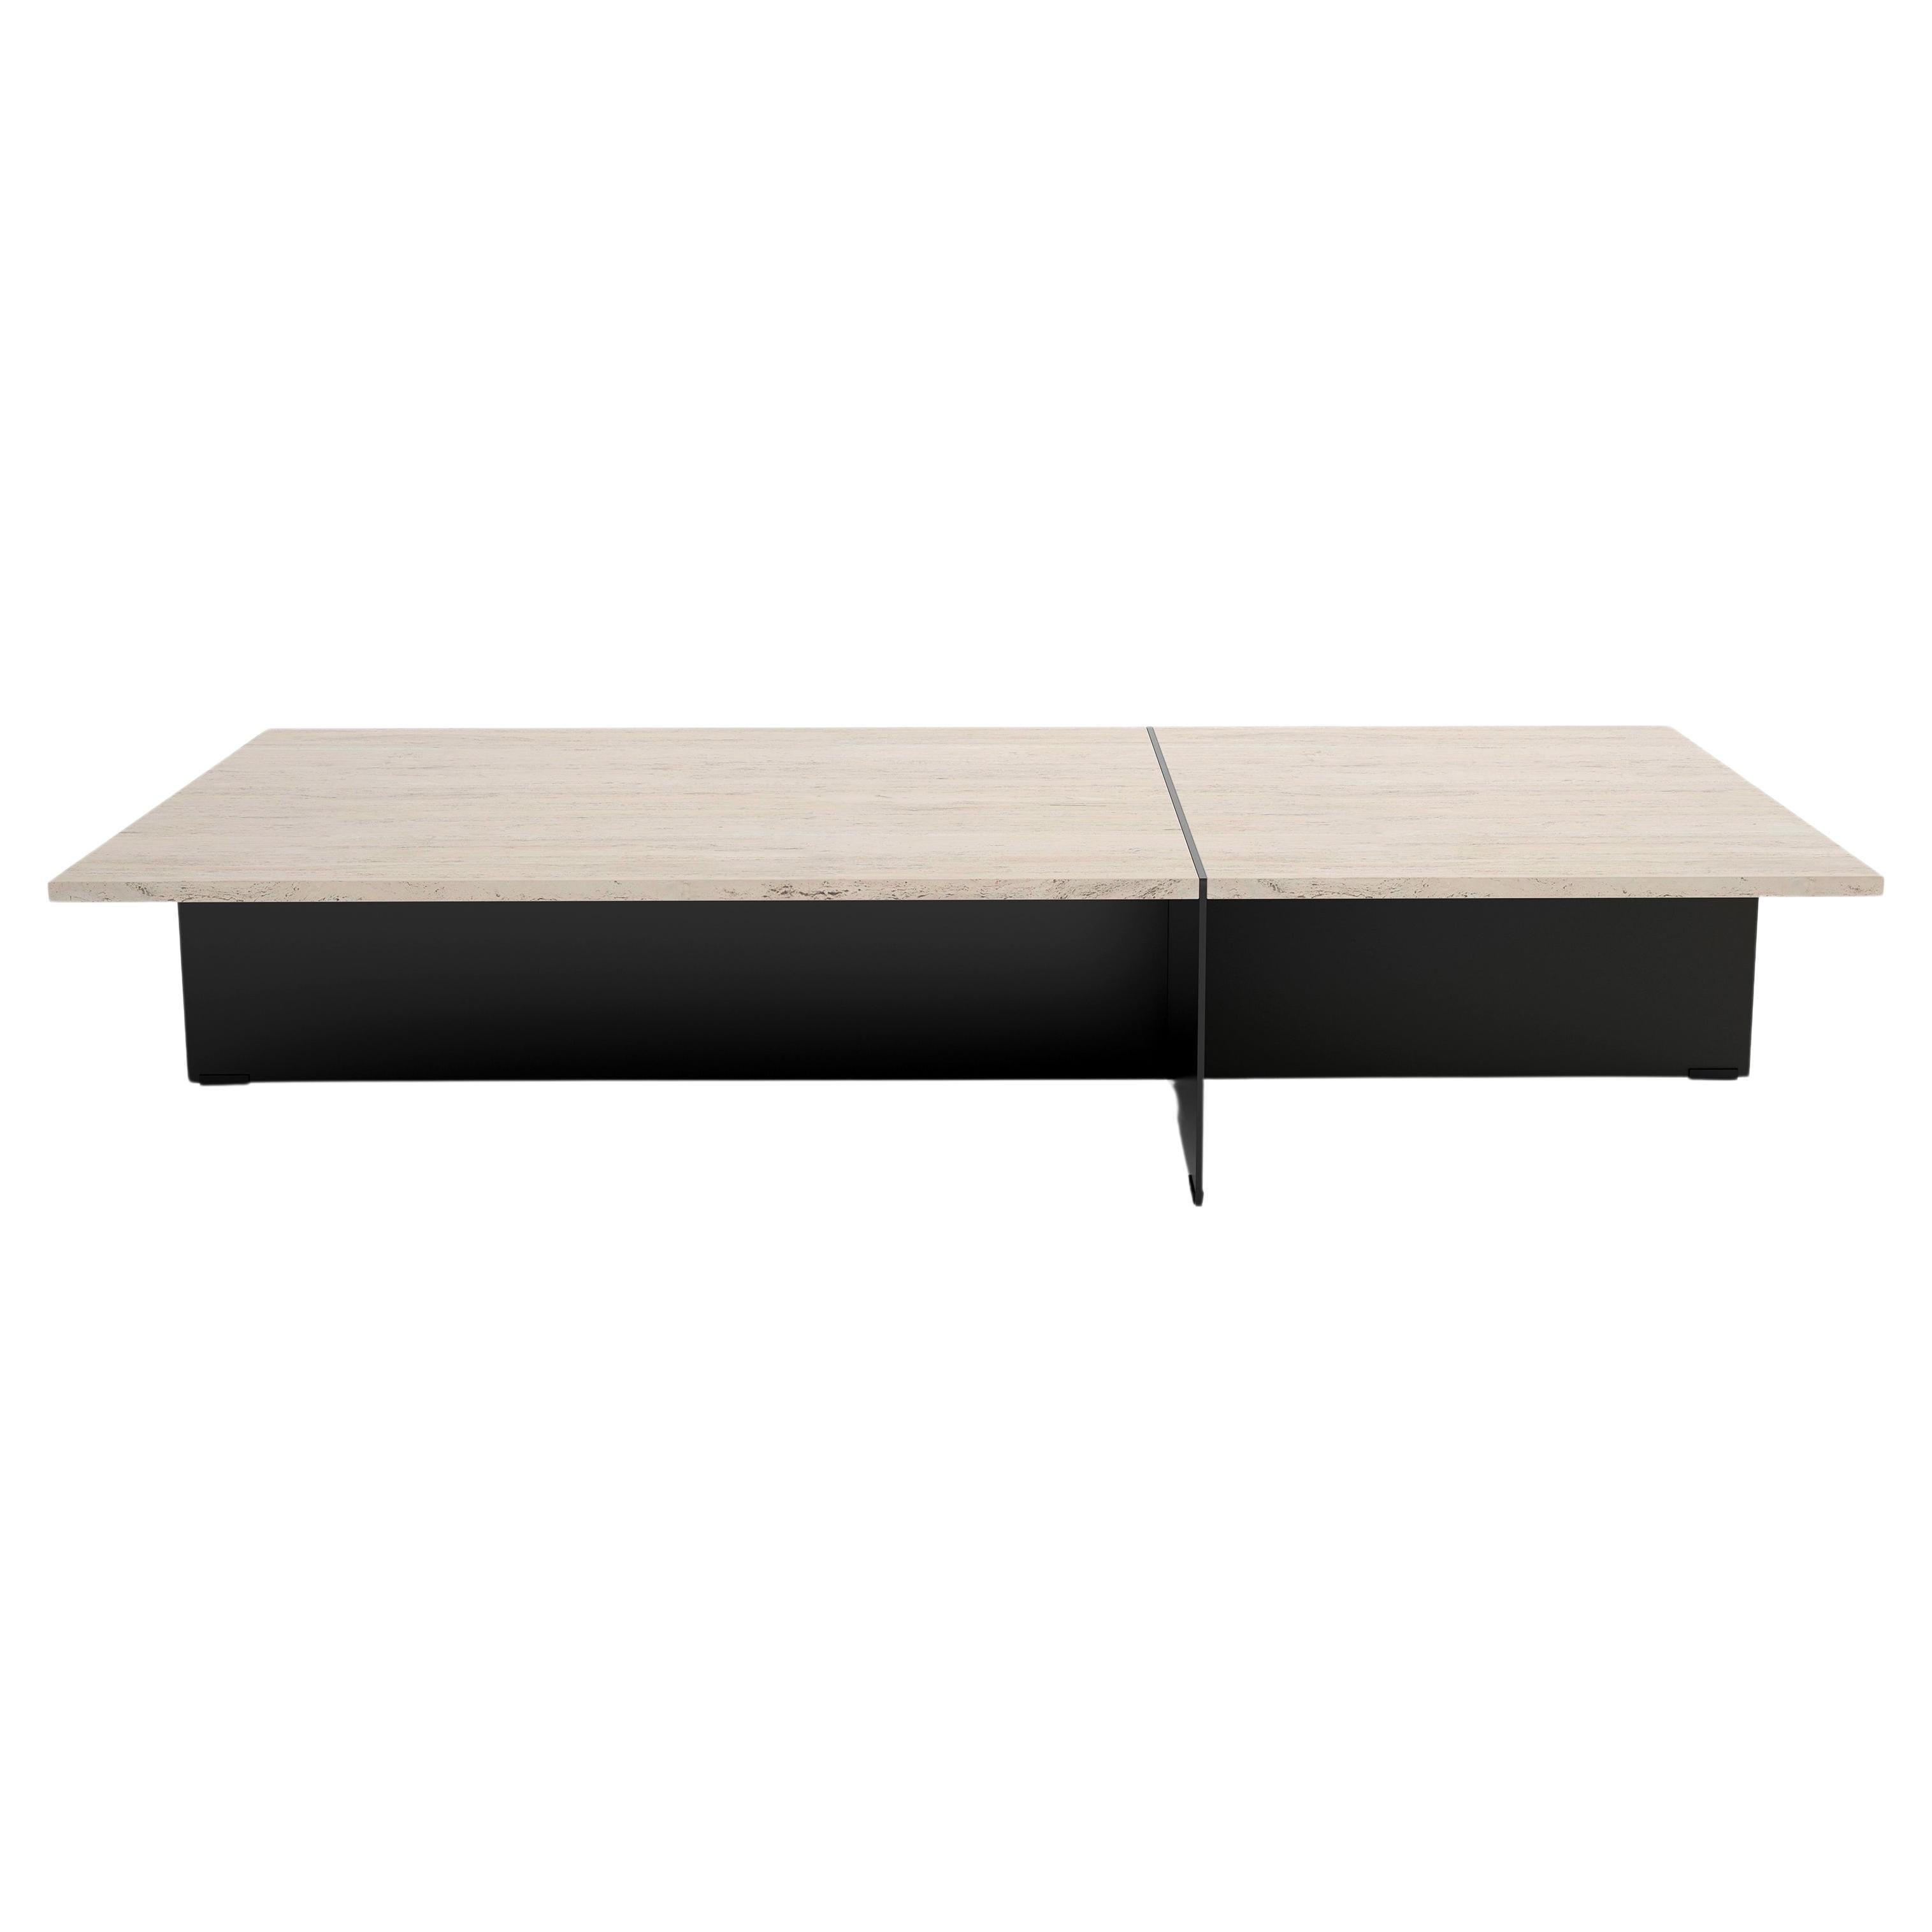 Division Rectangular Coffee Table by Phase Design For Sale